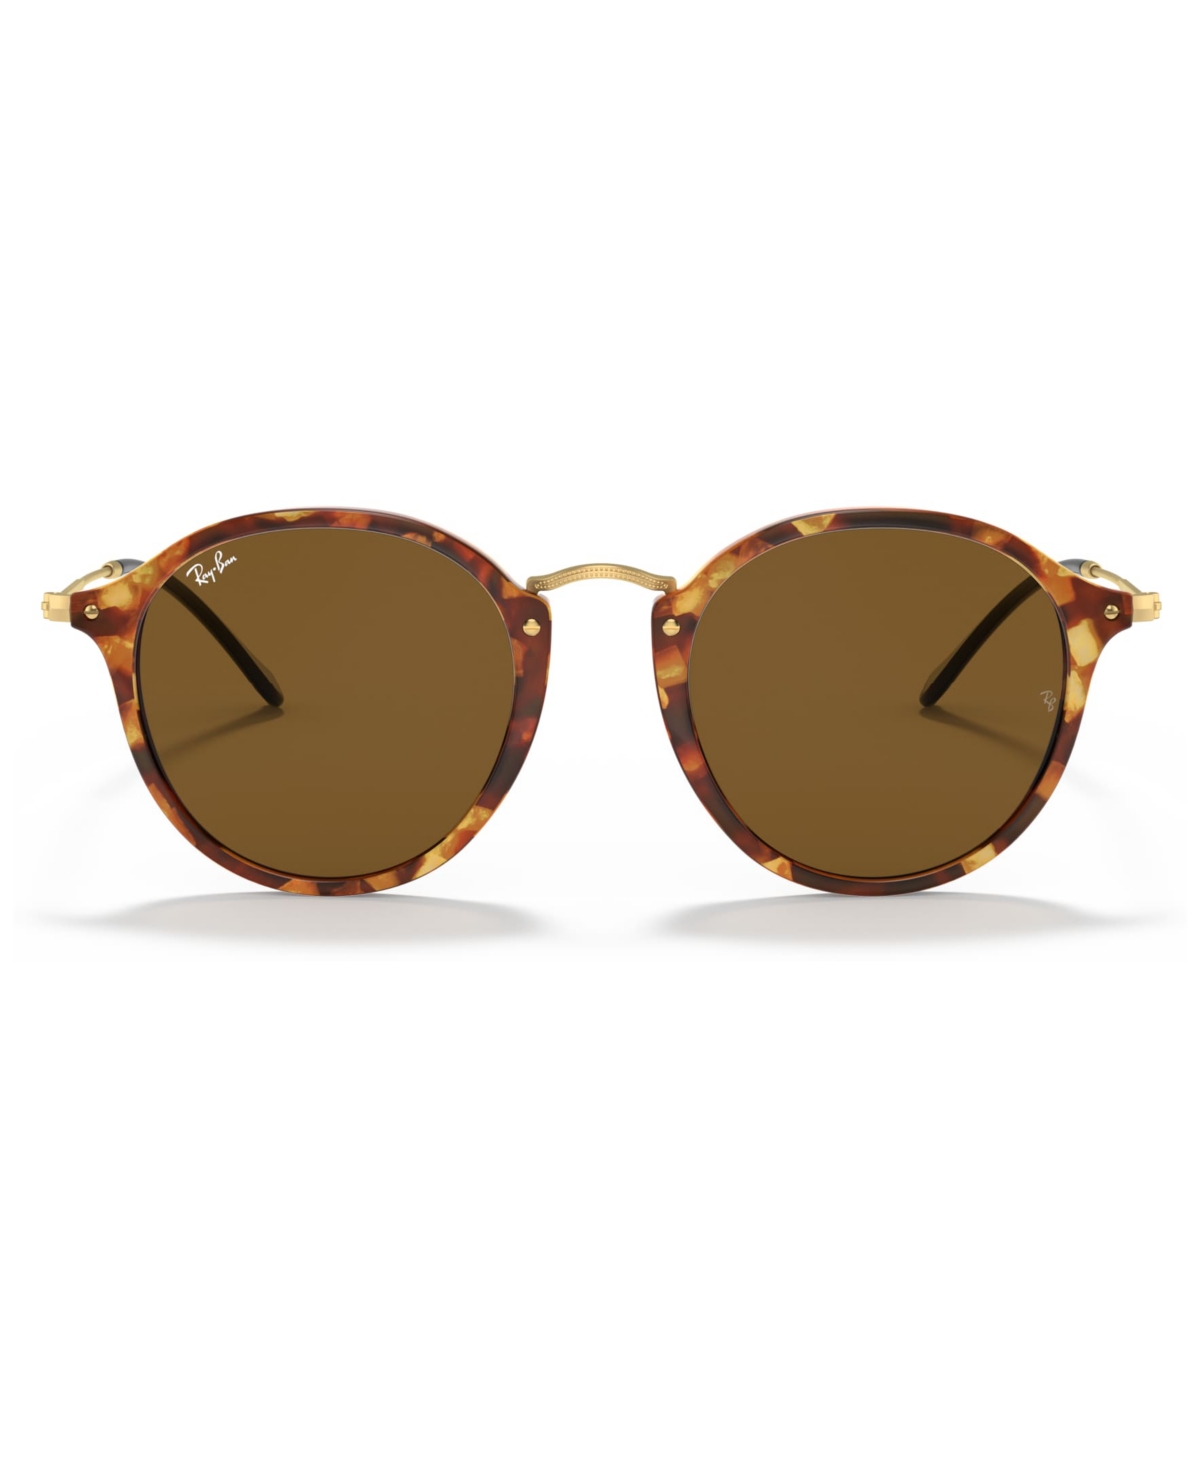 Ray Ban Sunglasses, Rb2447 Round Fleck In Tortoise Brown,brown